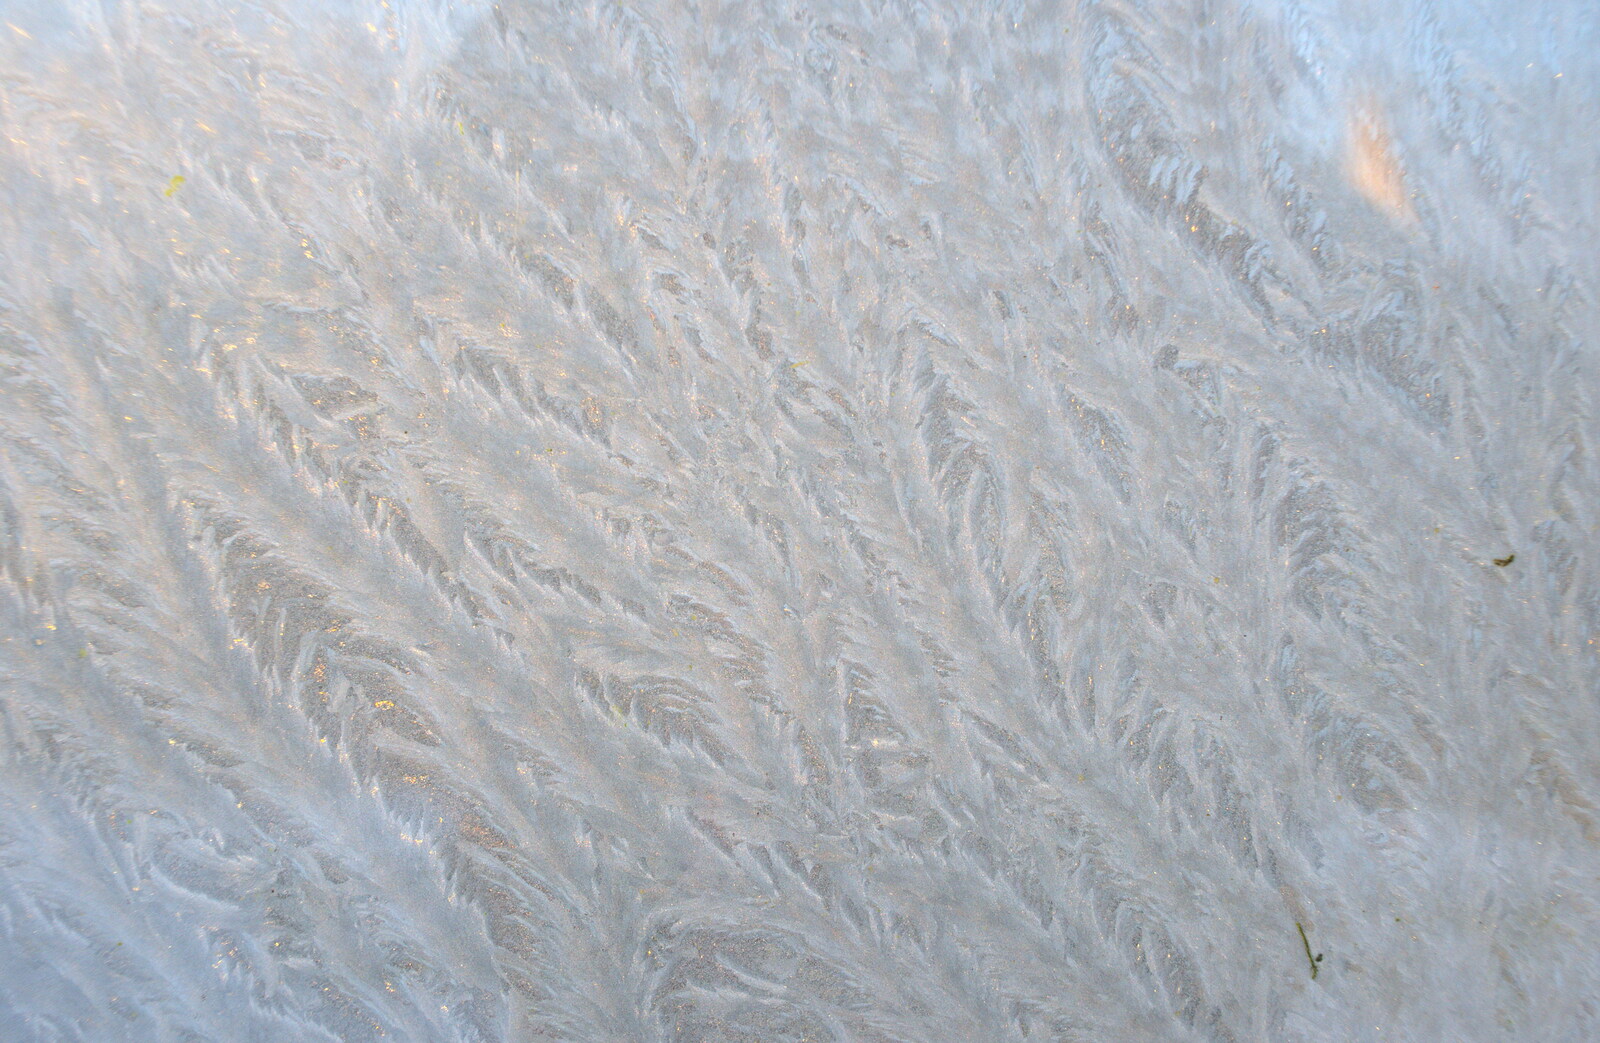 More ice patterns from A Couple of Snow Days, Brome, Suffolk - 16th January 2013